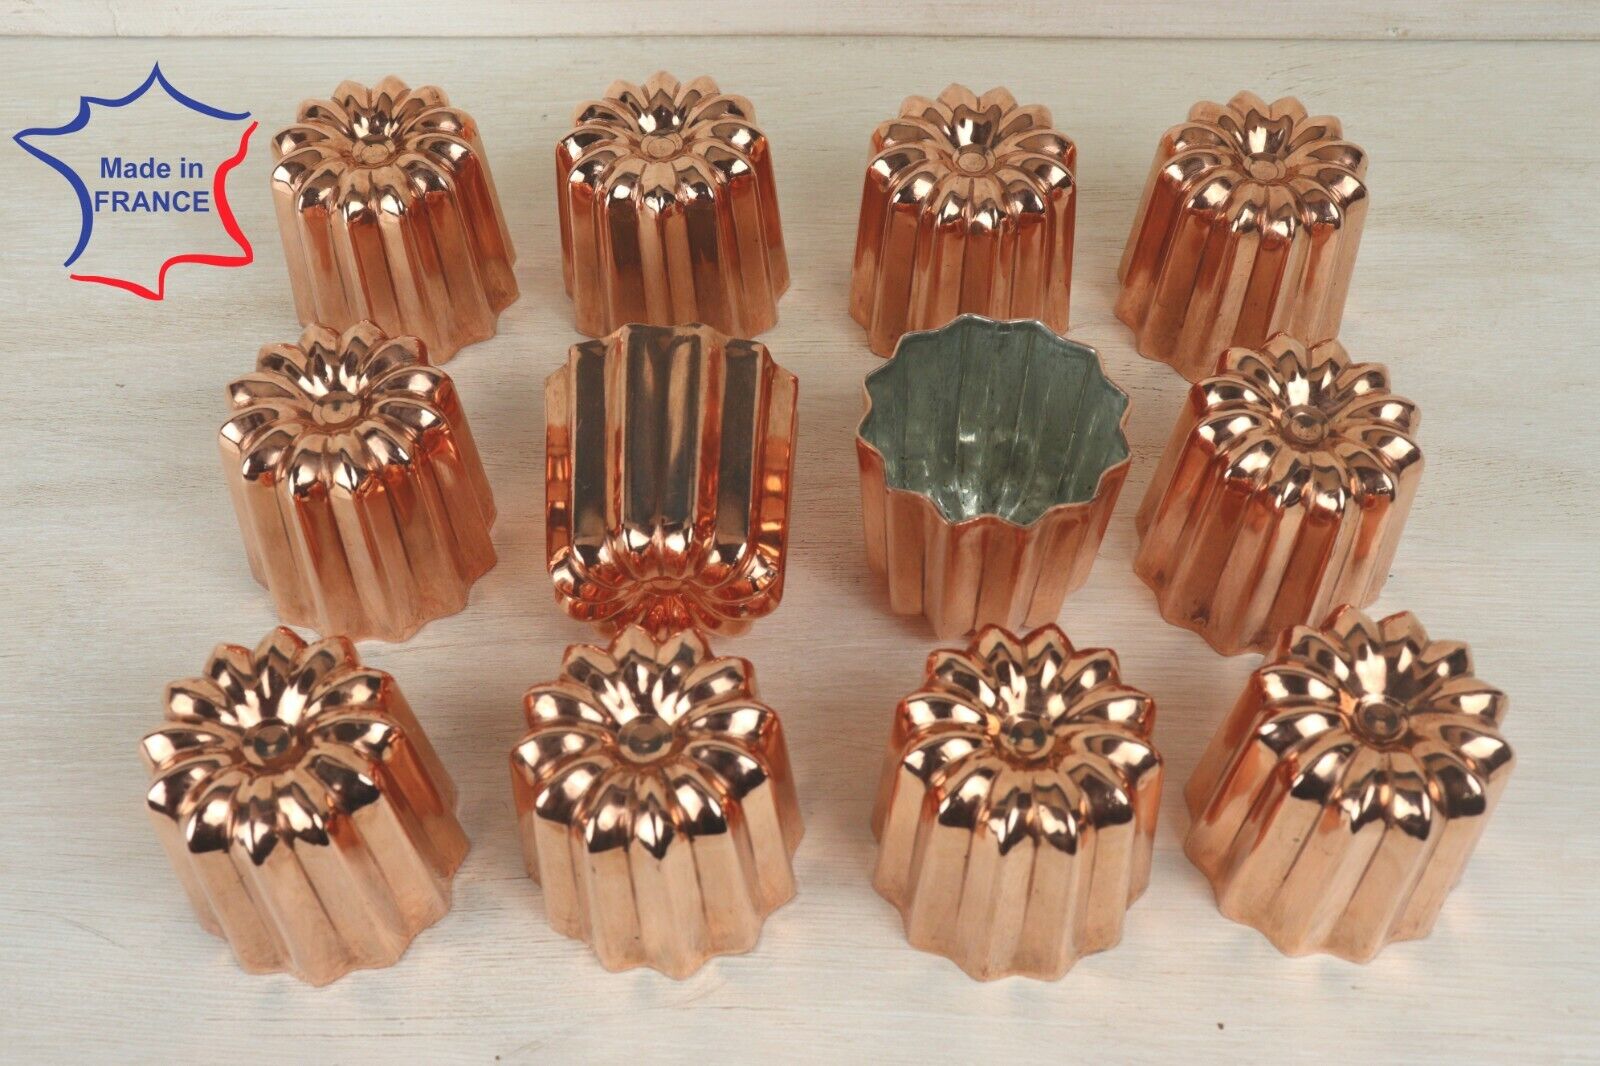 12 Copper canele molds Large 2.1 inches 12 Copper Cannele made in France